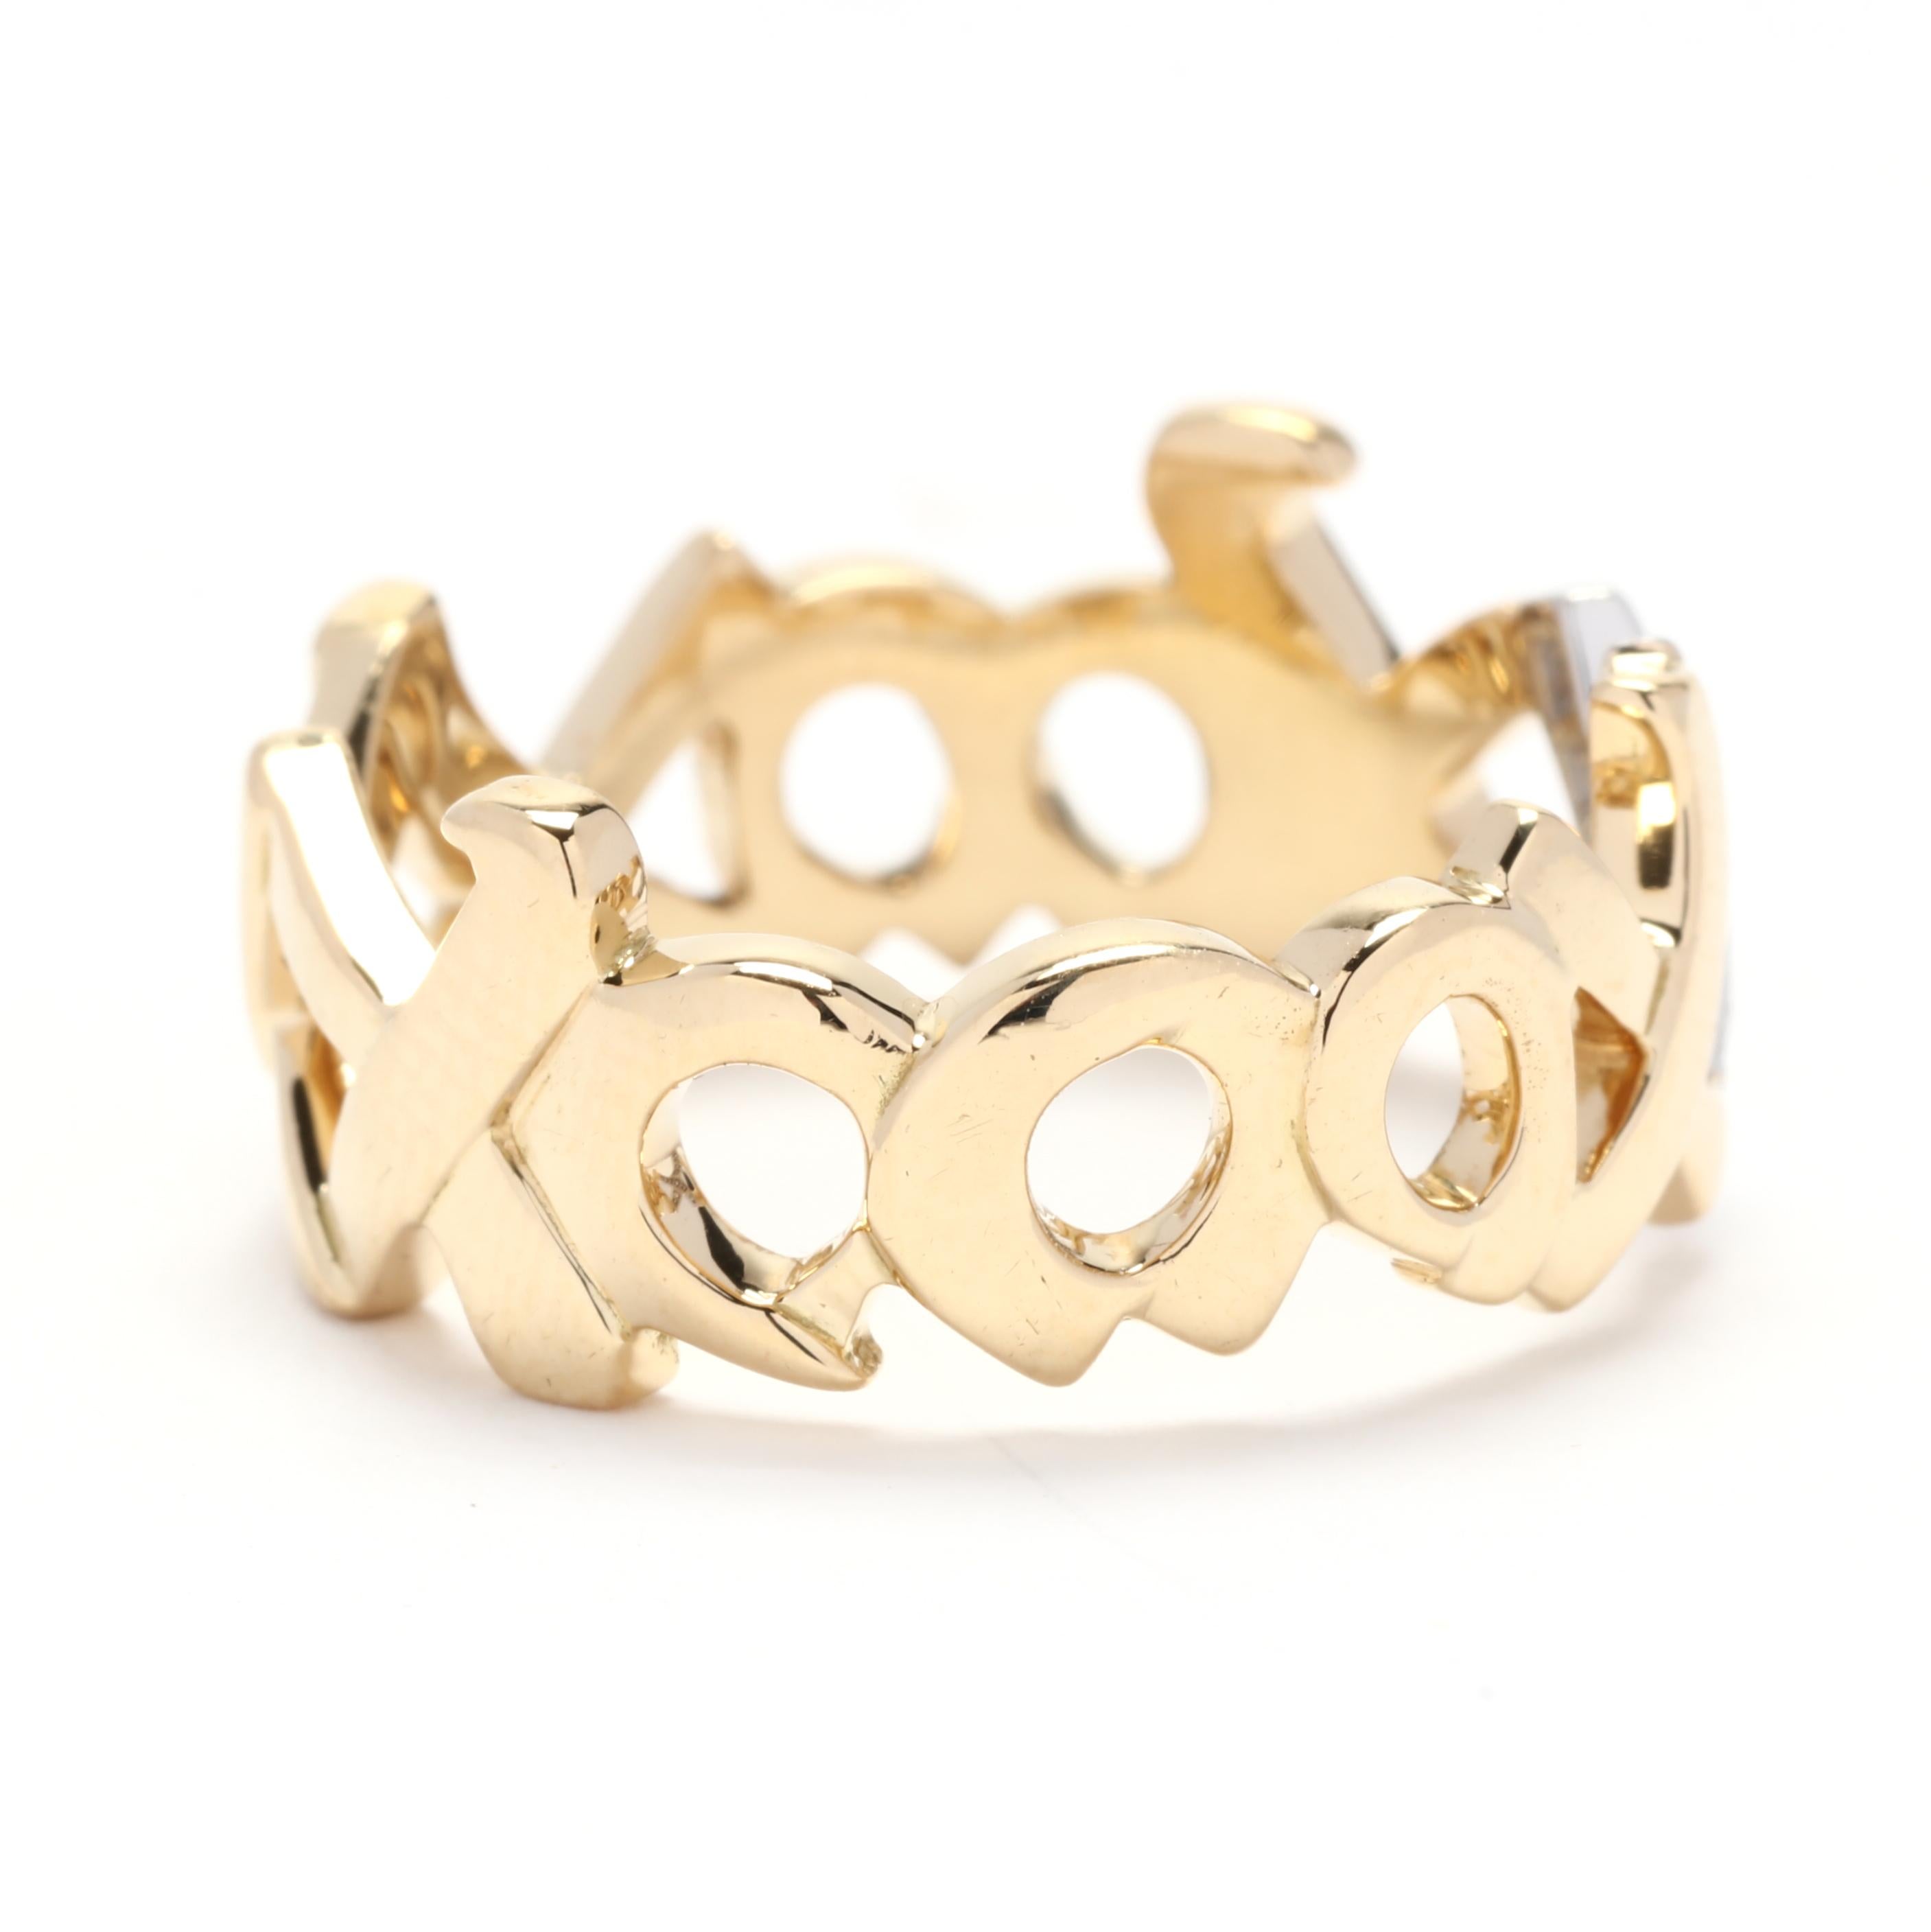 Add a touch of sophistication and luxury to your jewelry collection with this stunning Tiffany and Co Paloma Picasso XO diamond and gold ring. Crafted from platinum and 18k yellow gold, this ring features the iconic XO design by Paloma Picasso,